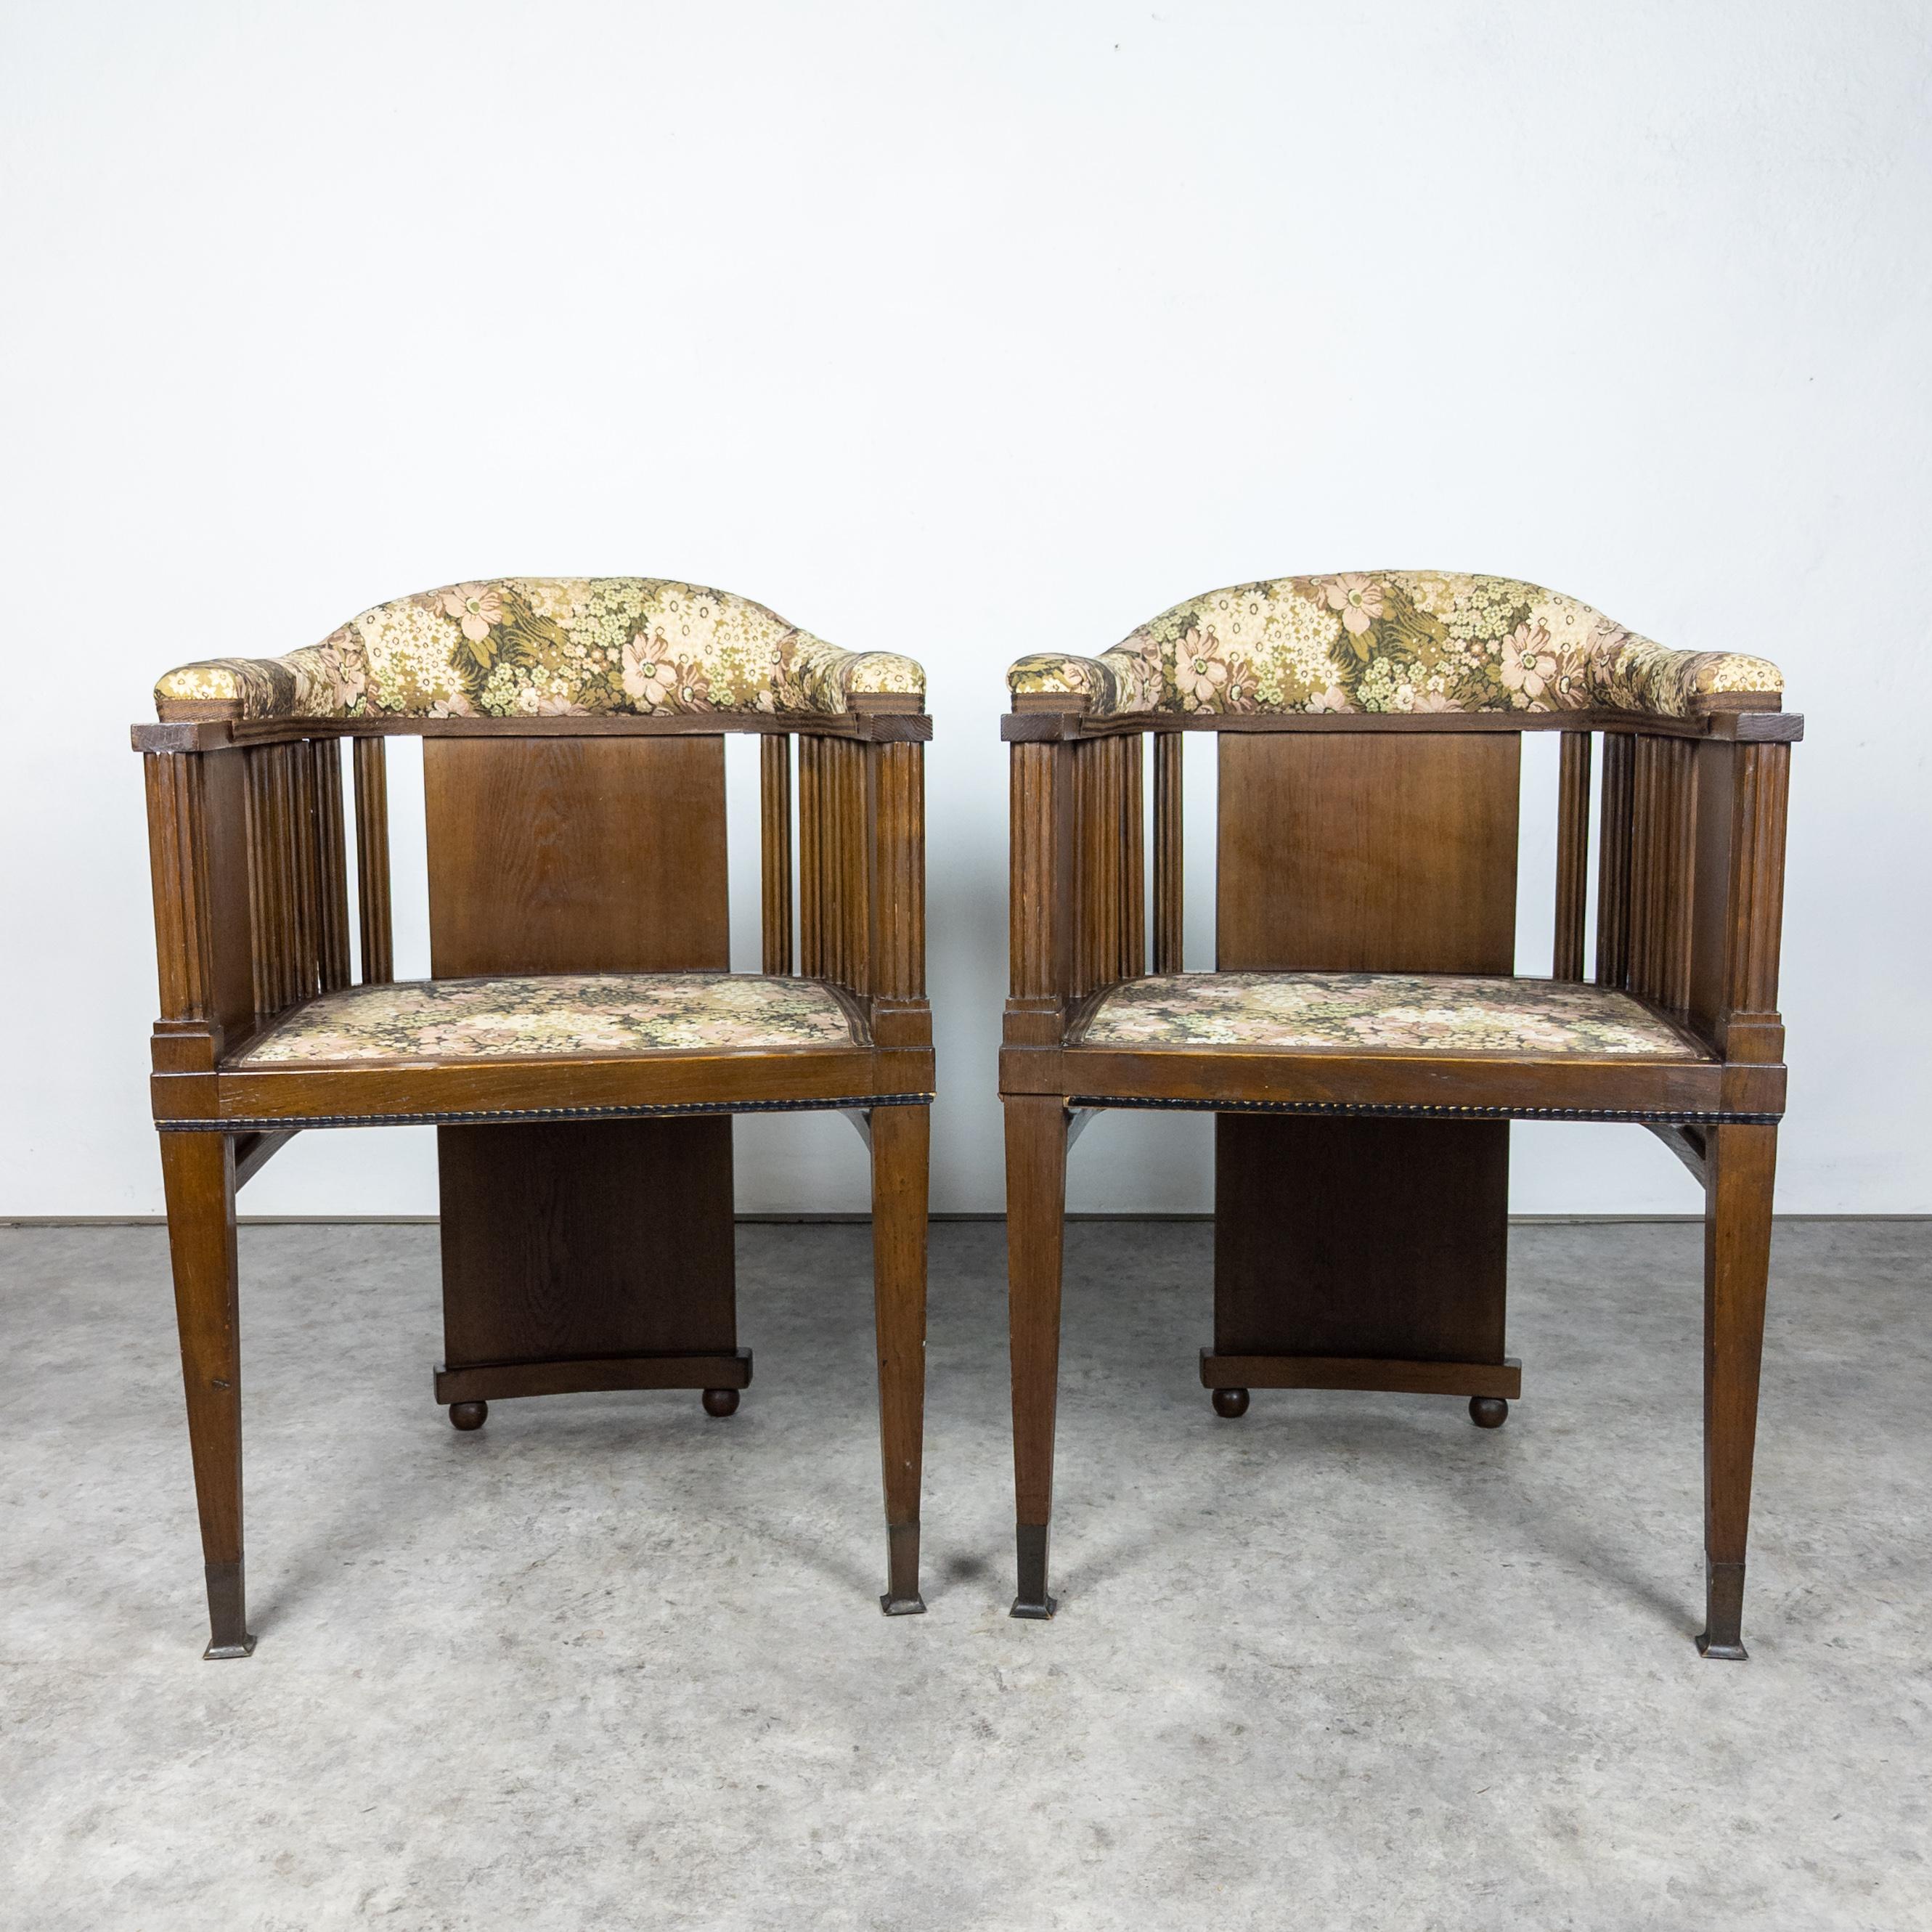 Pair of beautiful wooden carved armchairs in the manner of Viennese Modernism. This particular unique pieces were manufactured for the embassy of then Romanian kingdom in Prague, Czechoslovakia in baroque Morzinsky Palace (built by Jan Santini